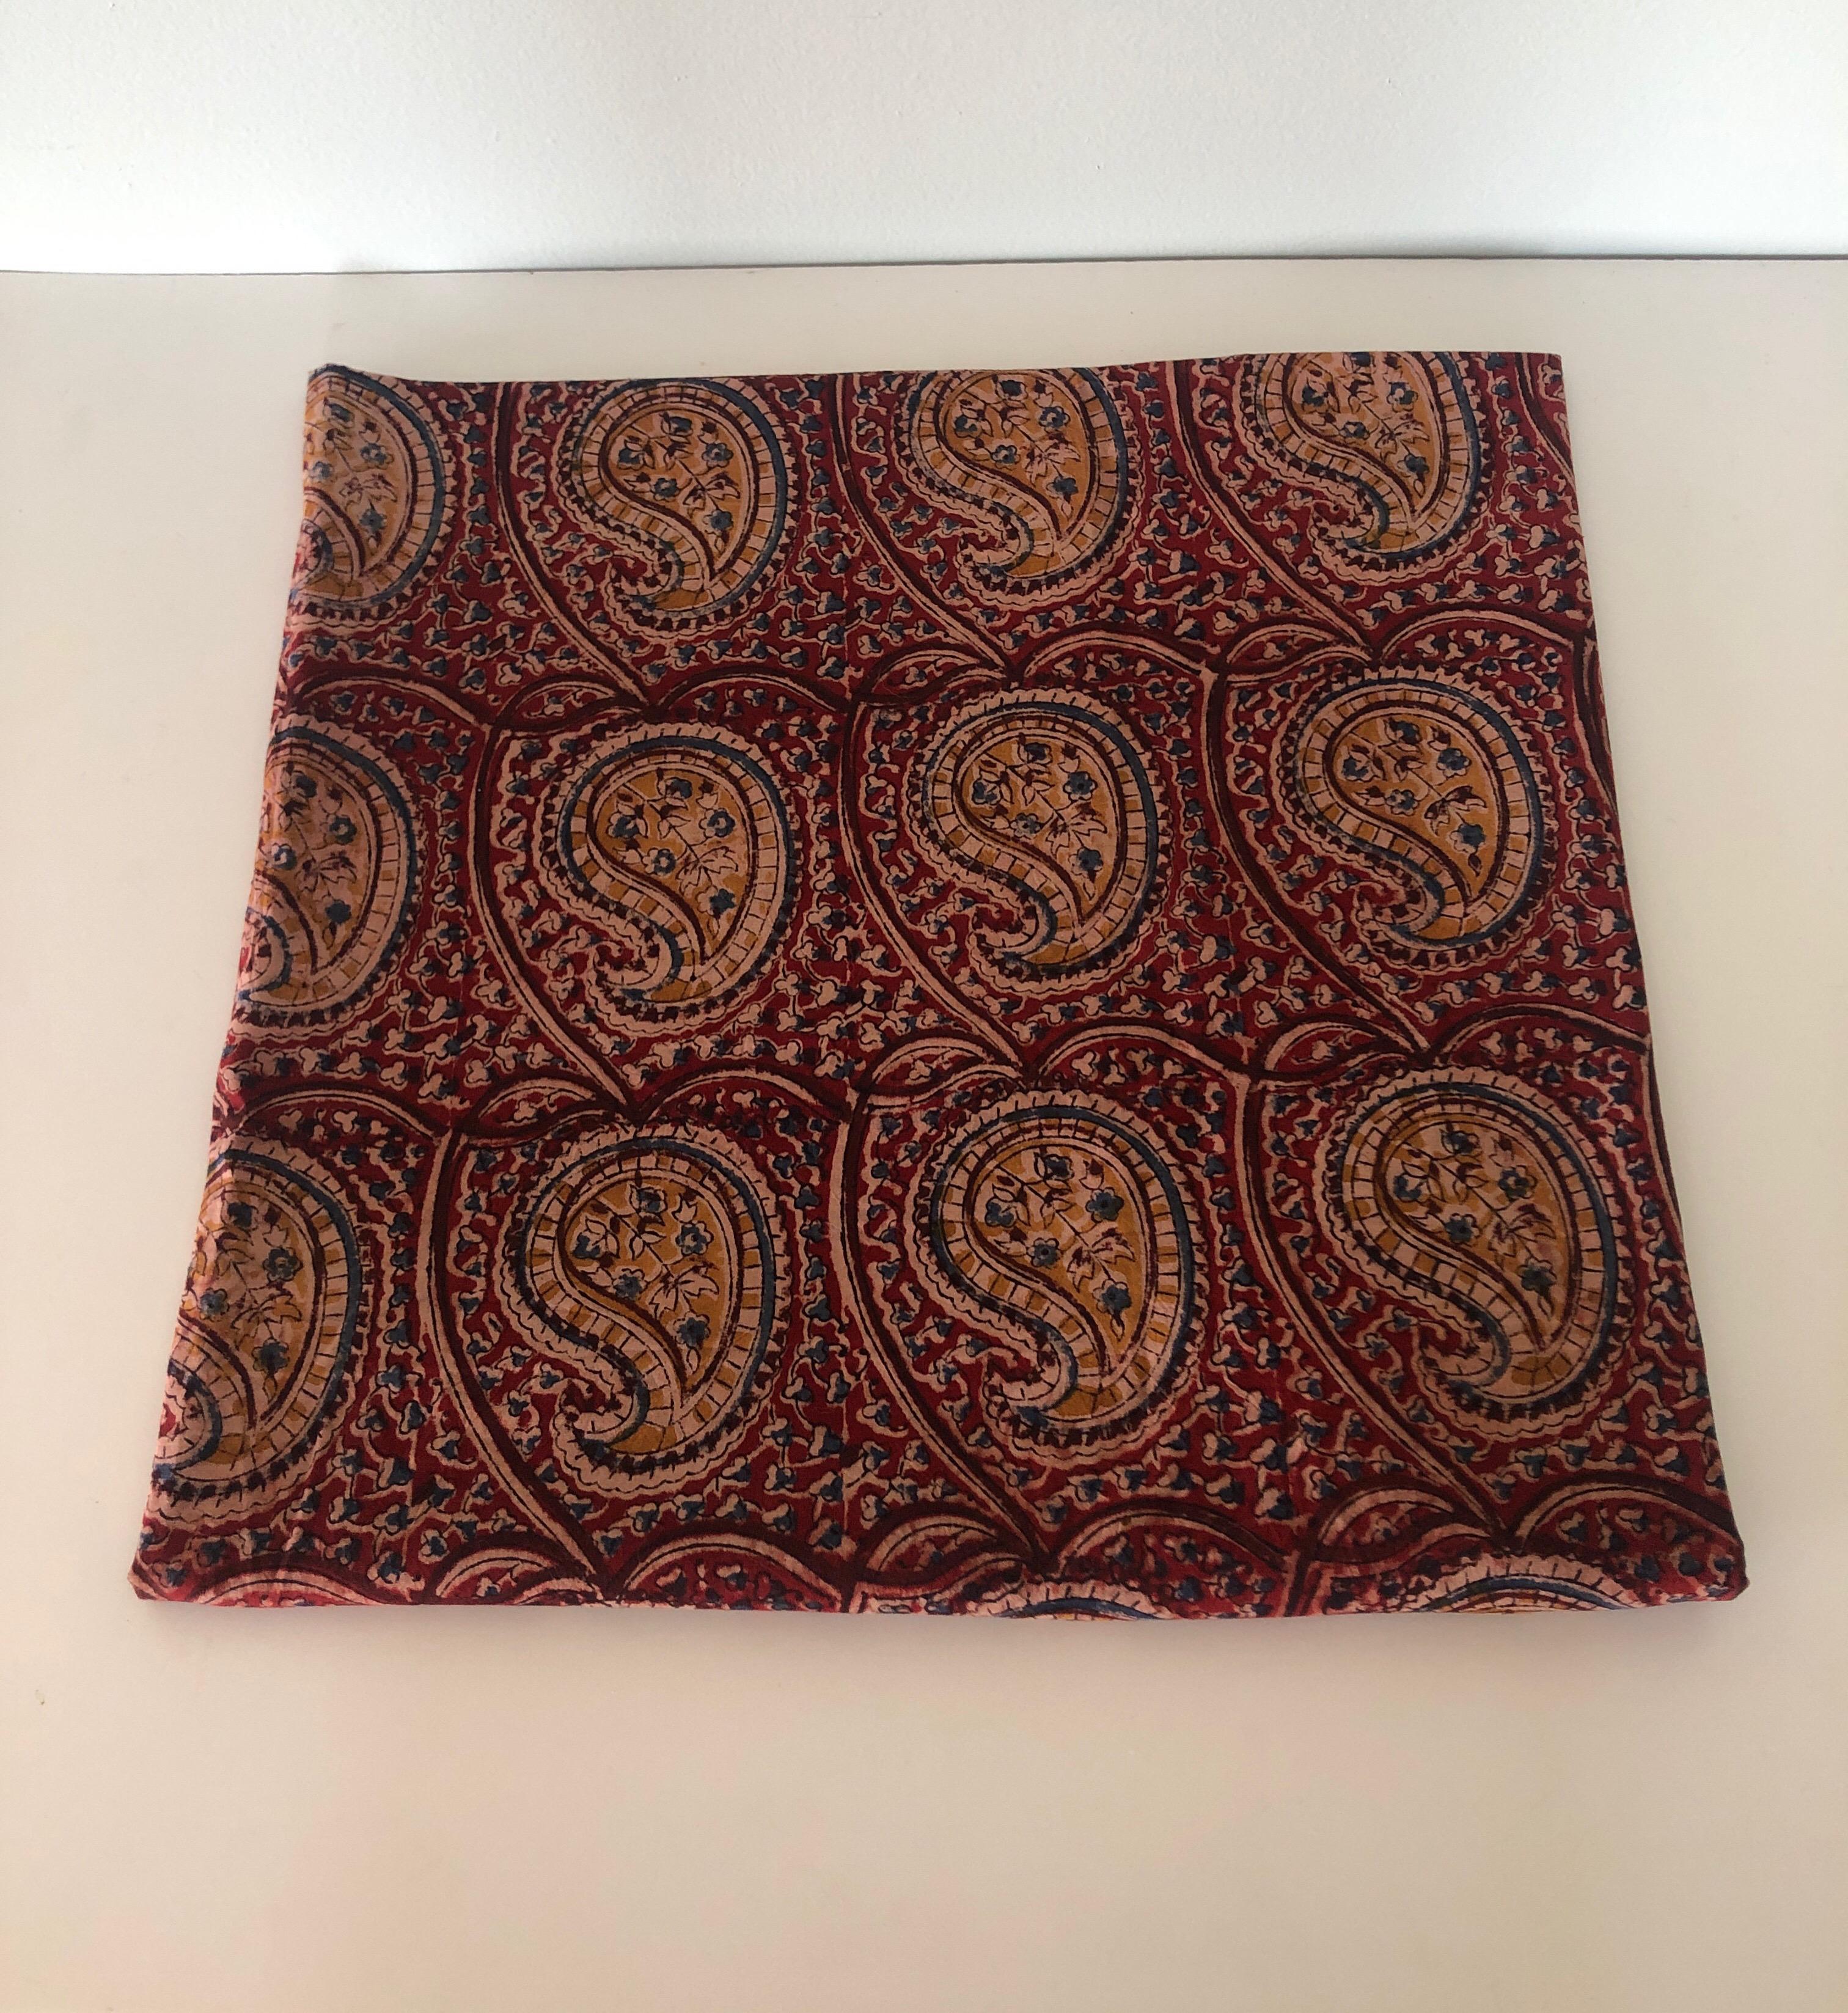 Vintage red and brown cotton printed Kalamkari print textile.
Ideal for pillows and upholstery.
Size: 46